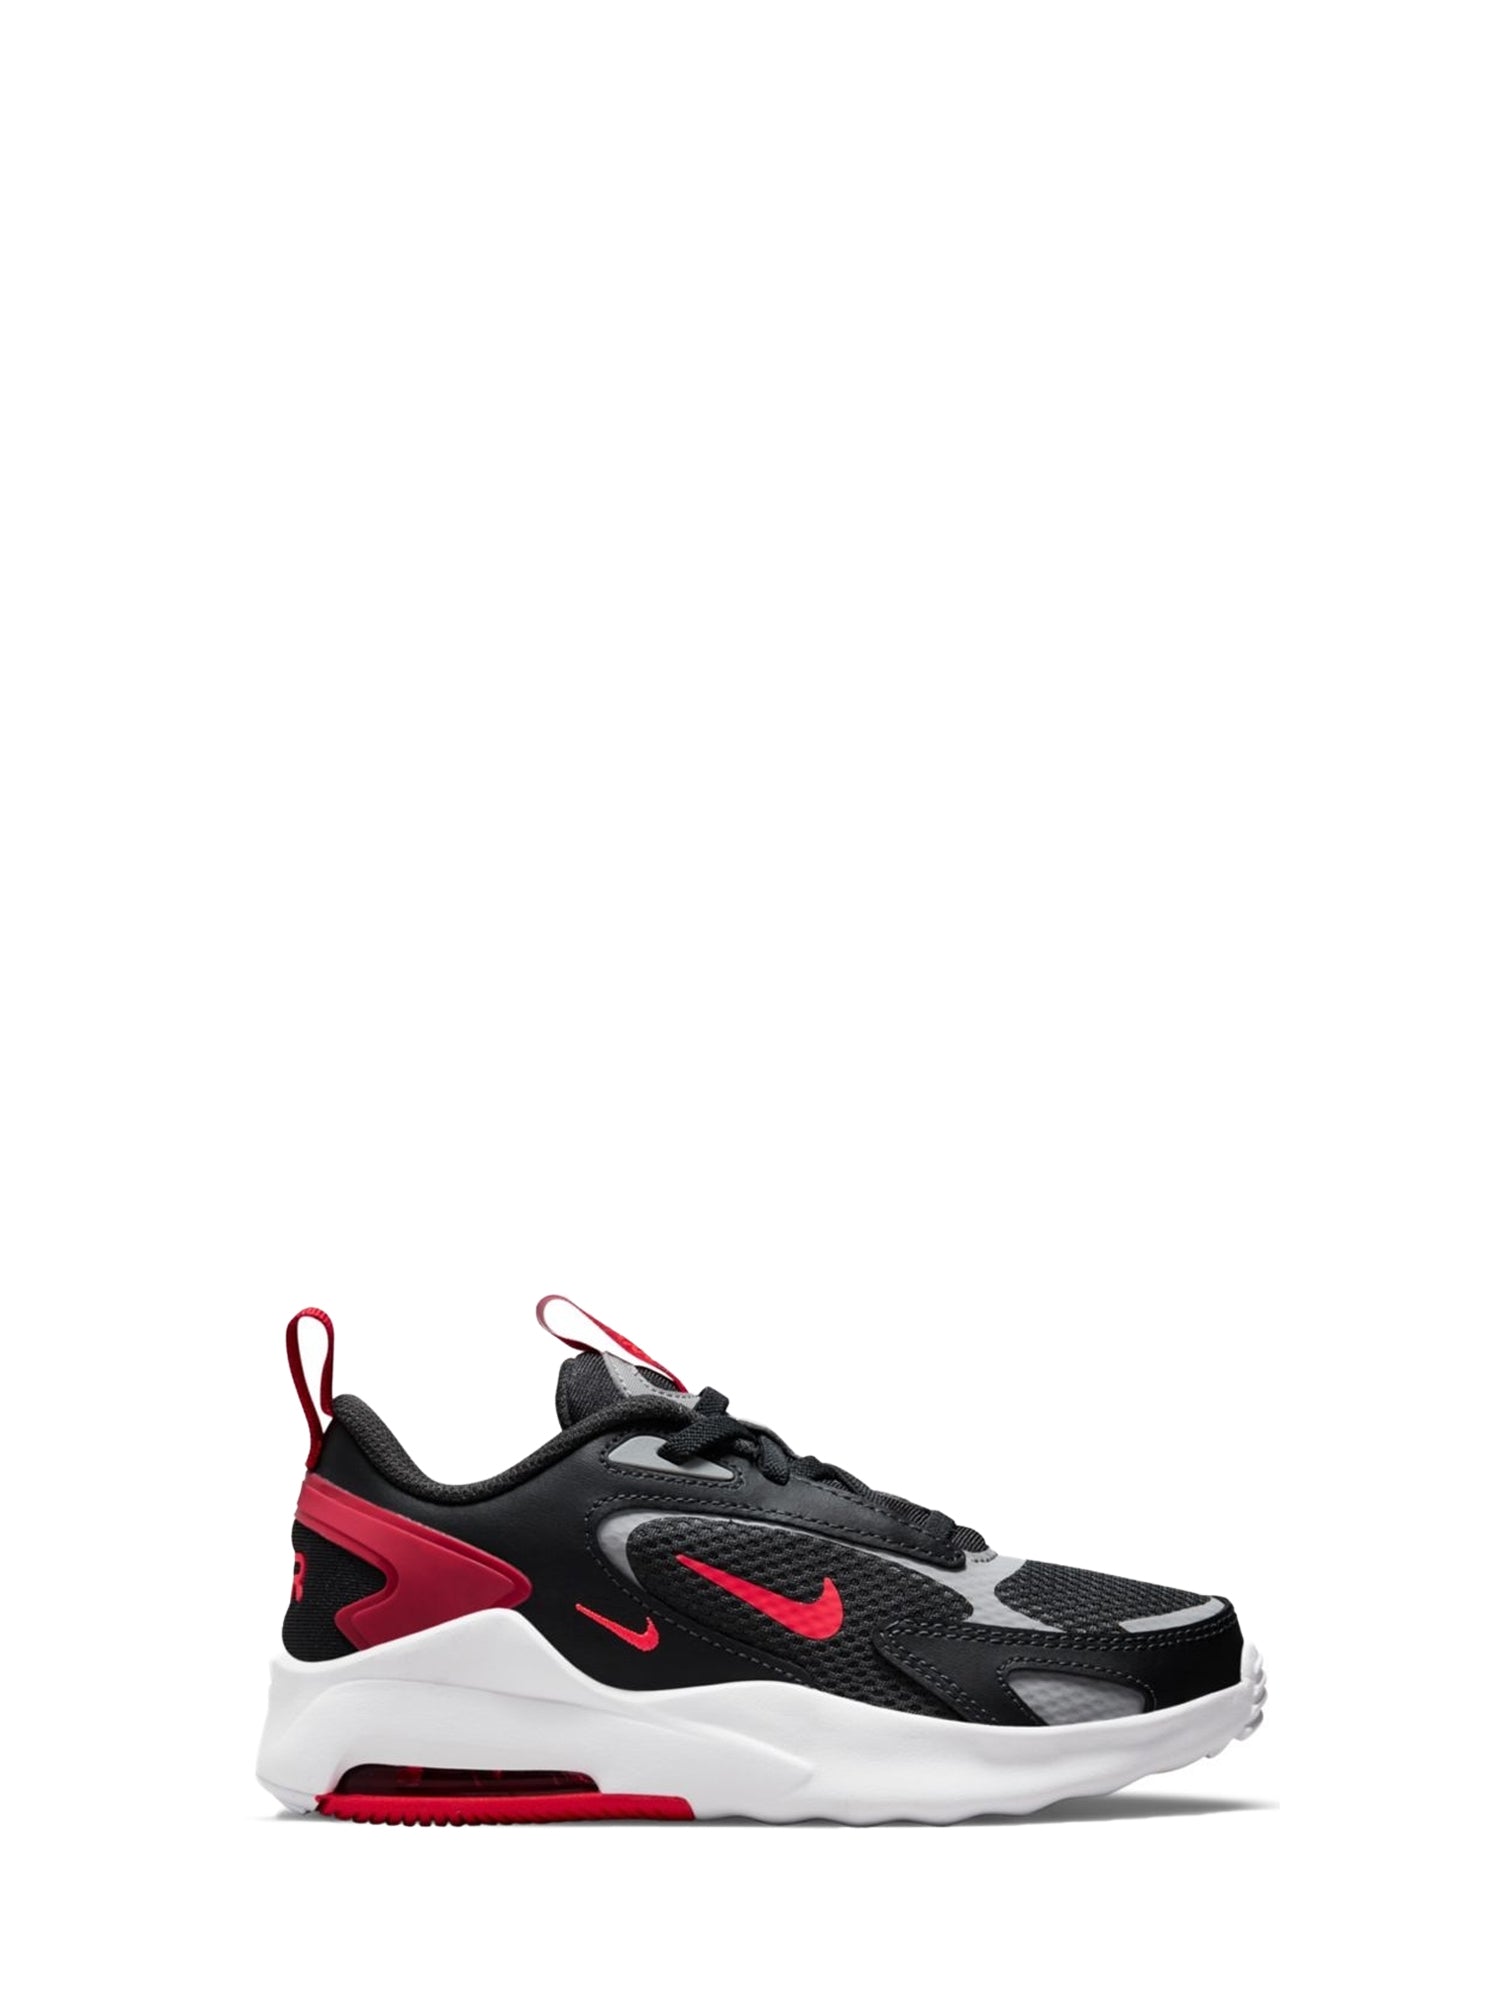 NIKE SNEAKERS AIR MAX BOLT NERO - ROSSO - BIANCO